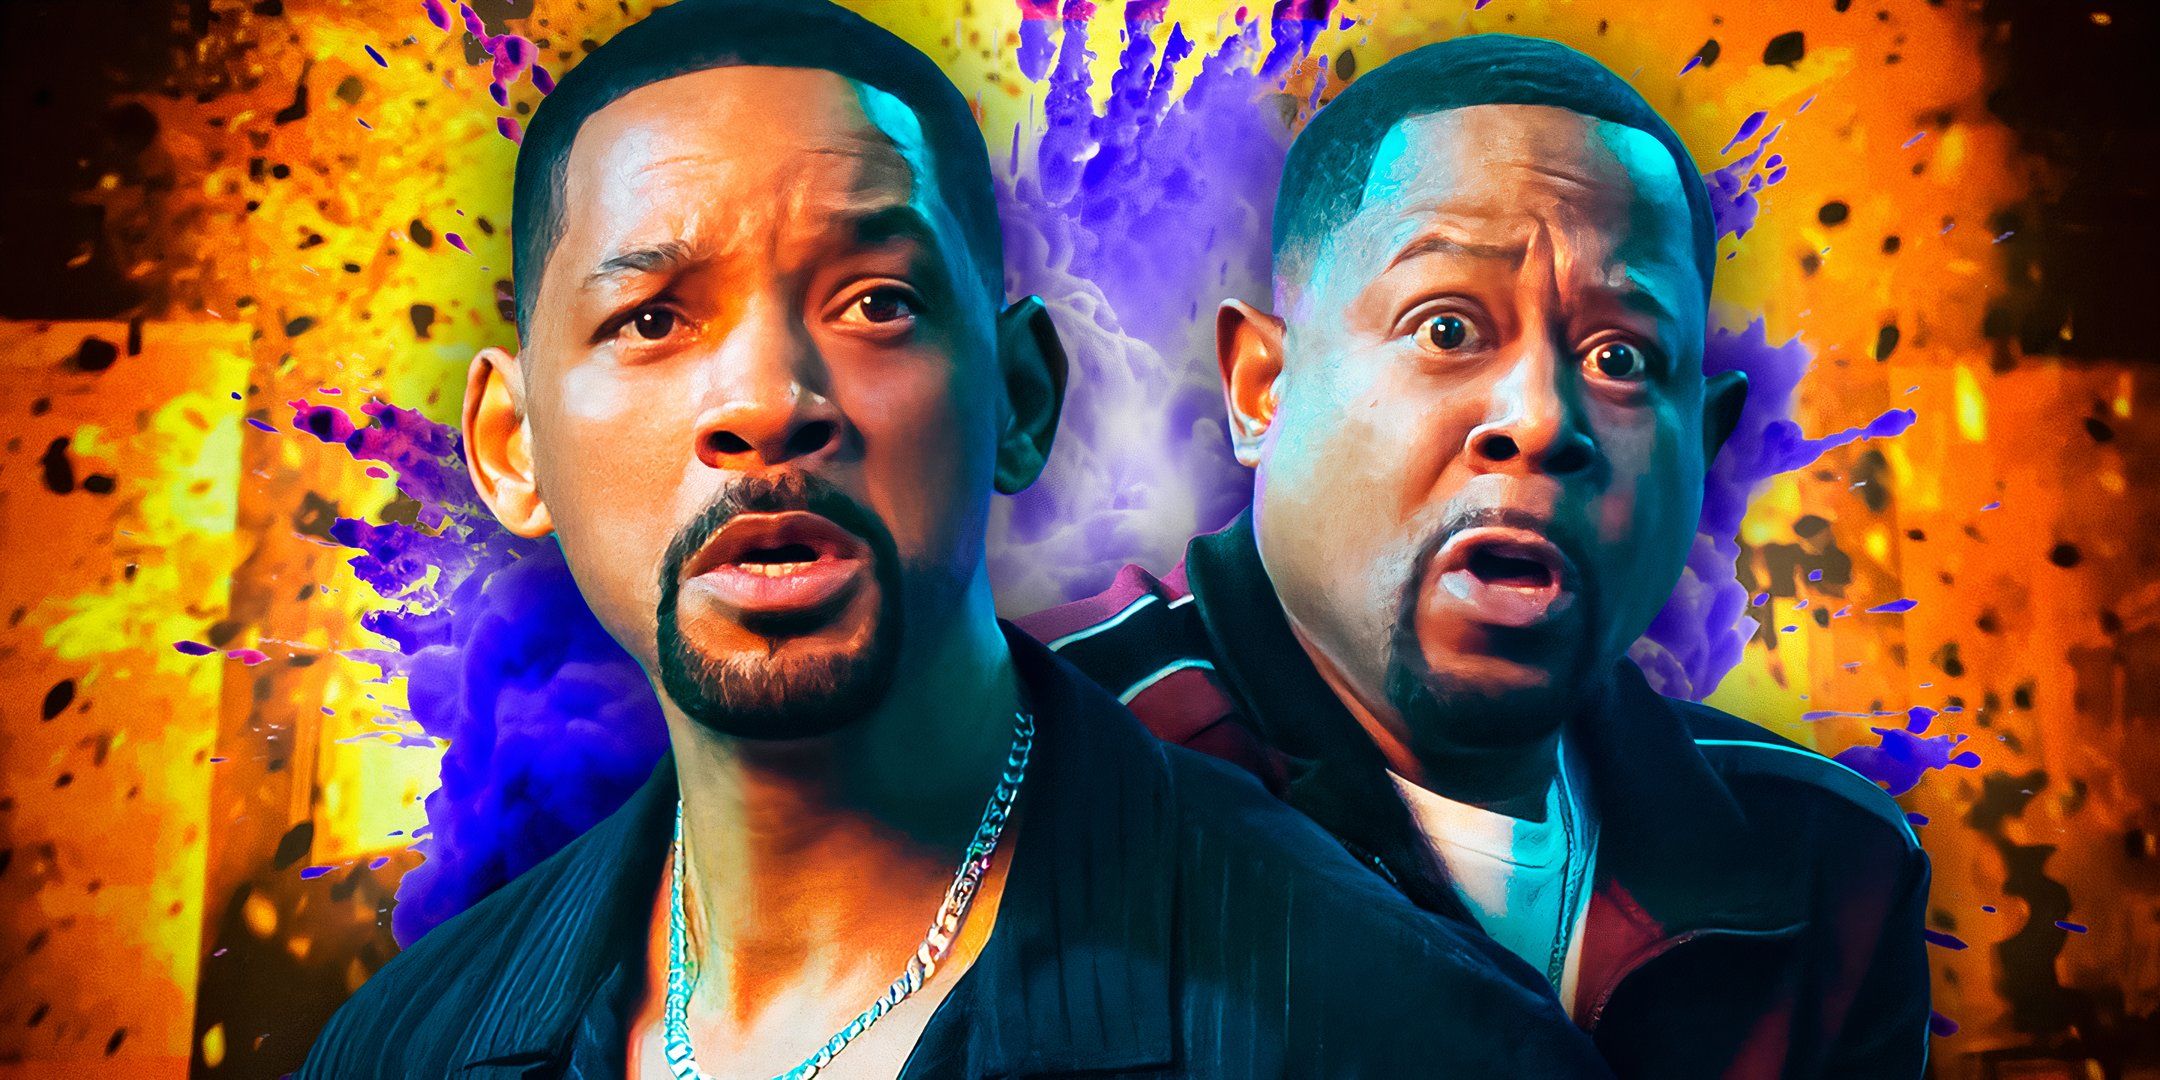 (Will Smith as Mike Lowre and Martin Lawrence as Marcus Burnett from Bad Boys Ride or Die